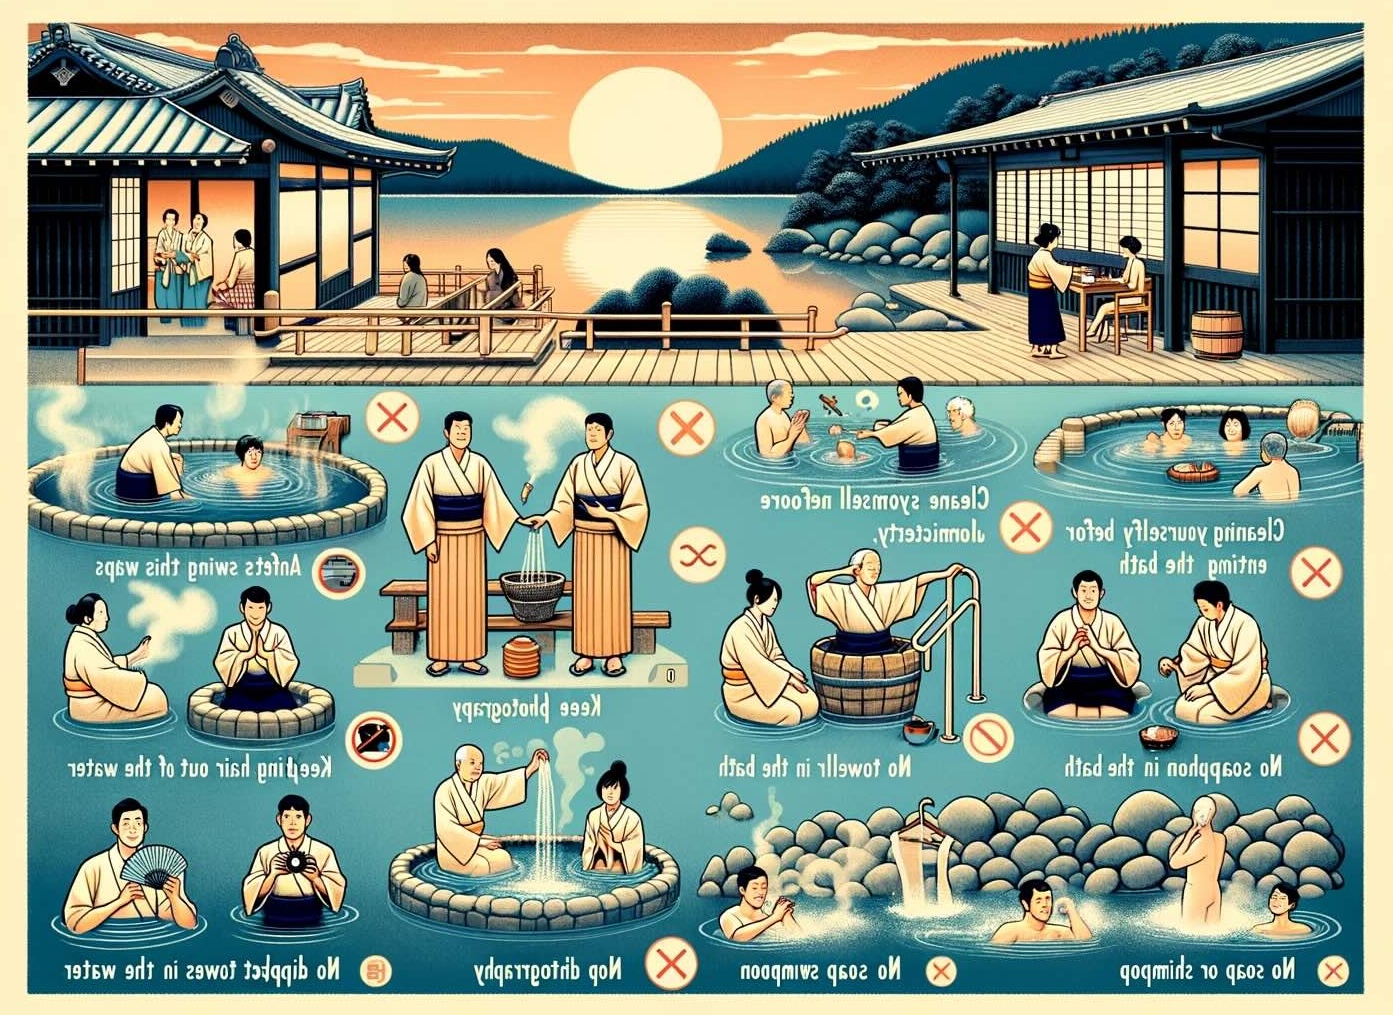 The dos and don'ts of Japanese onsen etiquette this visual guide captures the essential practices and rules to follow for a respectful and enjoyable onsen experience.